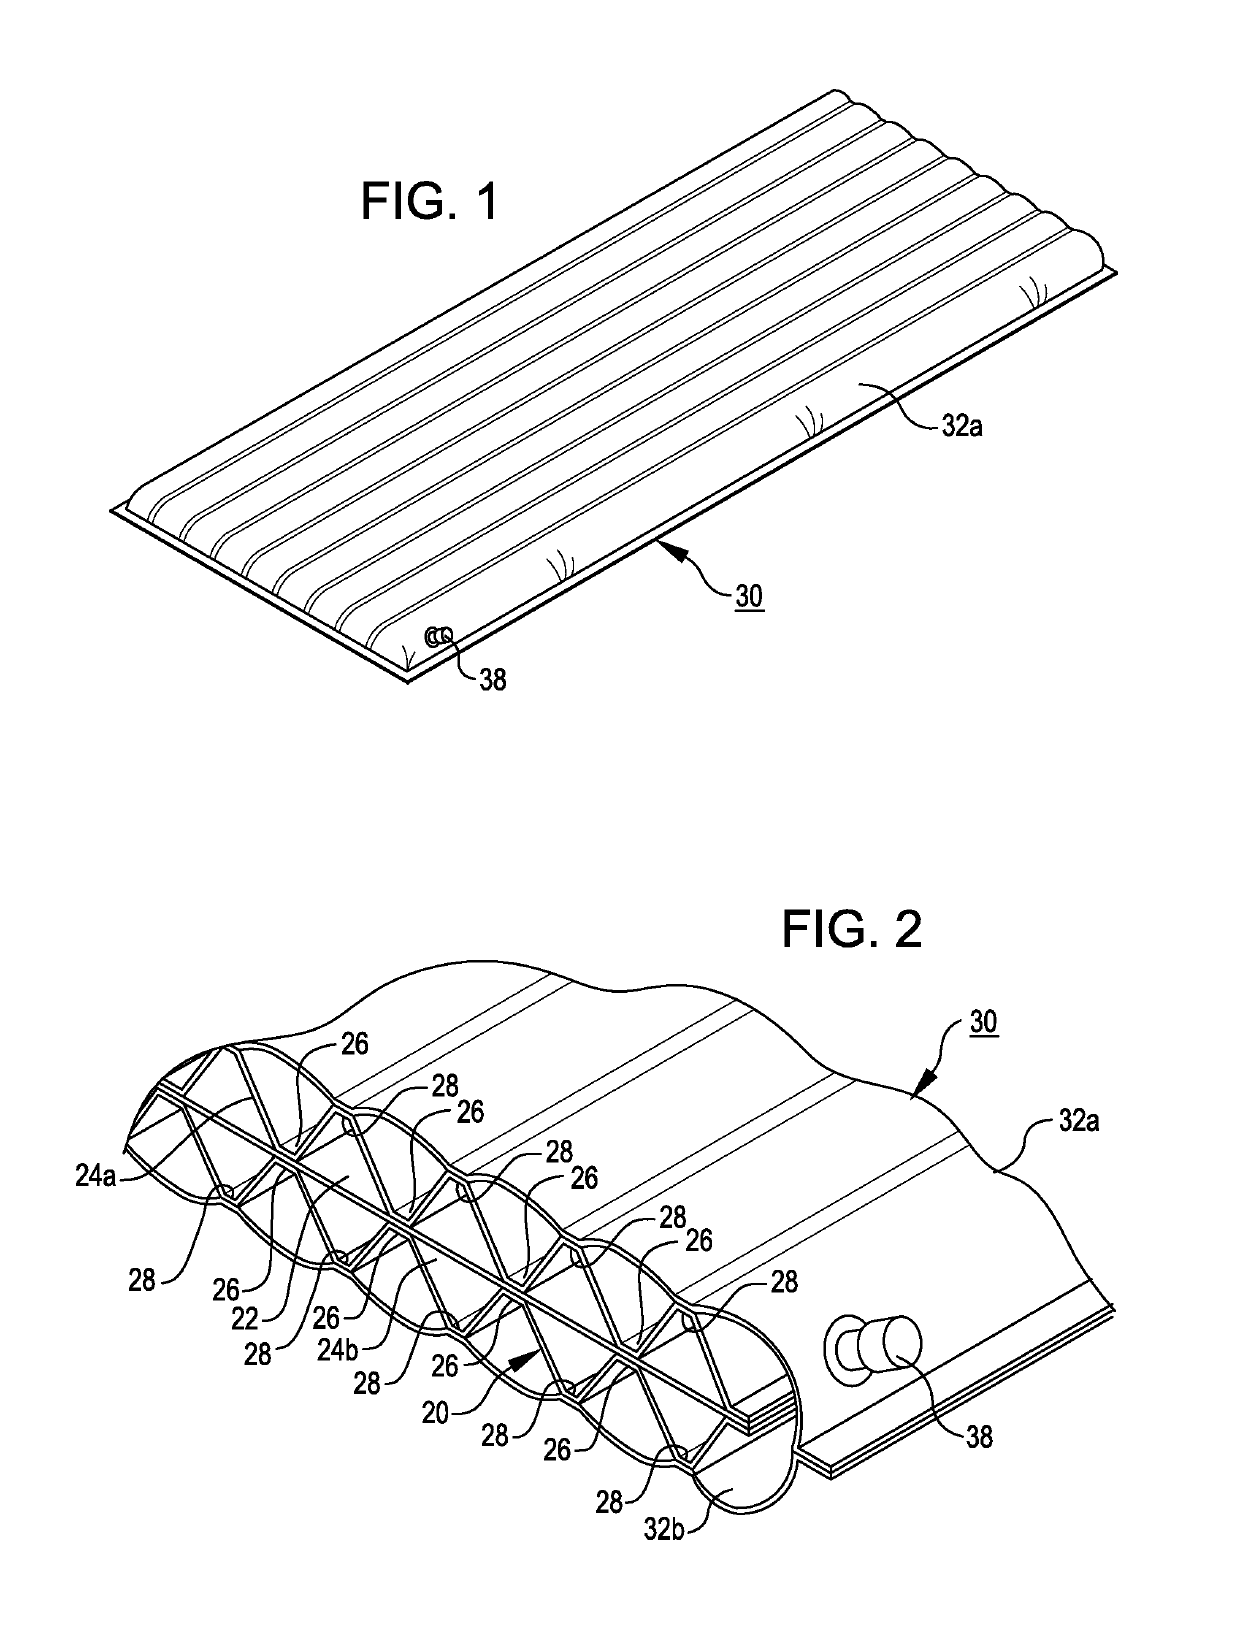 Cellular matrix with integrated radiant and/or convection barriers particularly for use with inflatable bodies